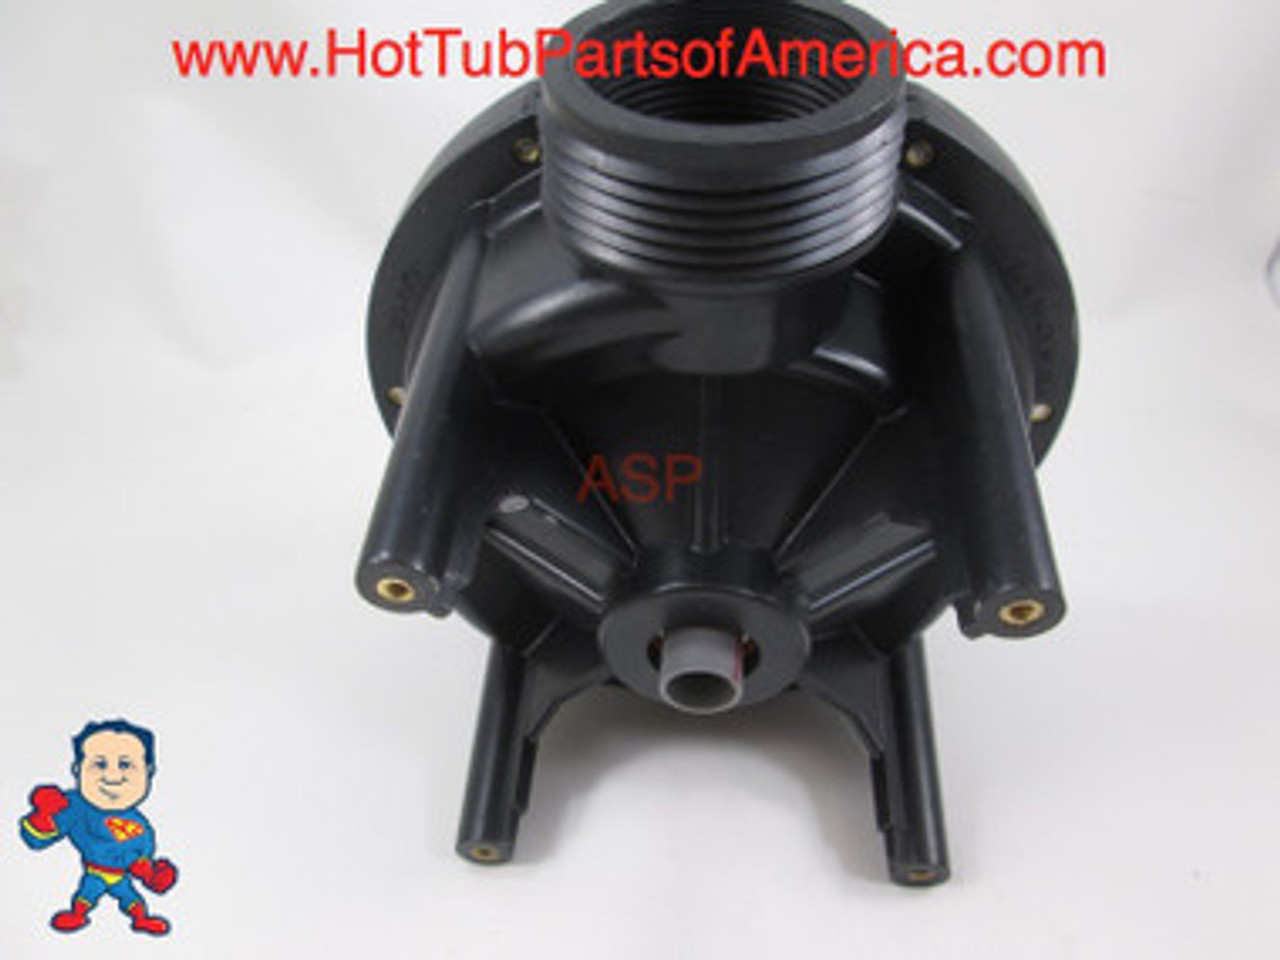 Wet End,  Aqua-Flo, FMCP, 1.5HP, 1-1/2"mbt, 48 frame Flo-Master Series, TMCP
The Thru-Bolts are about 5 1/4" apart in a cross pattern and 3 5/8" Side to Side....